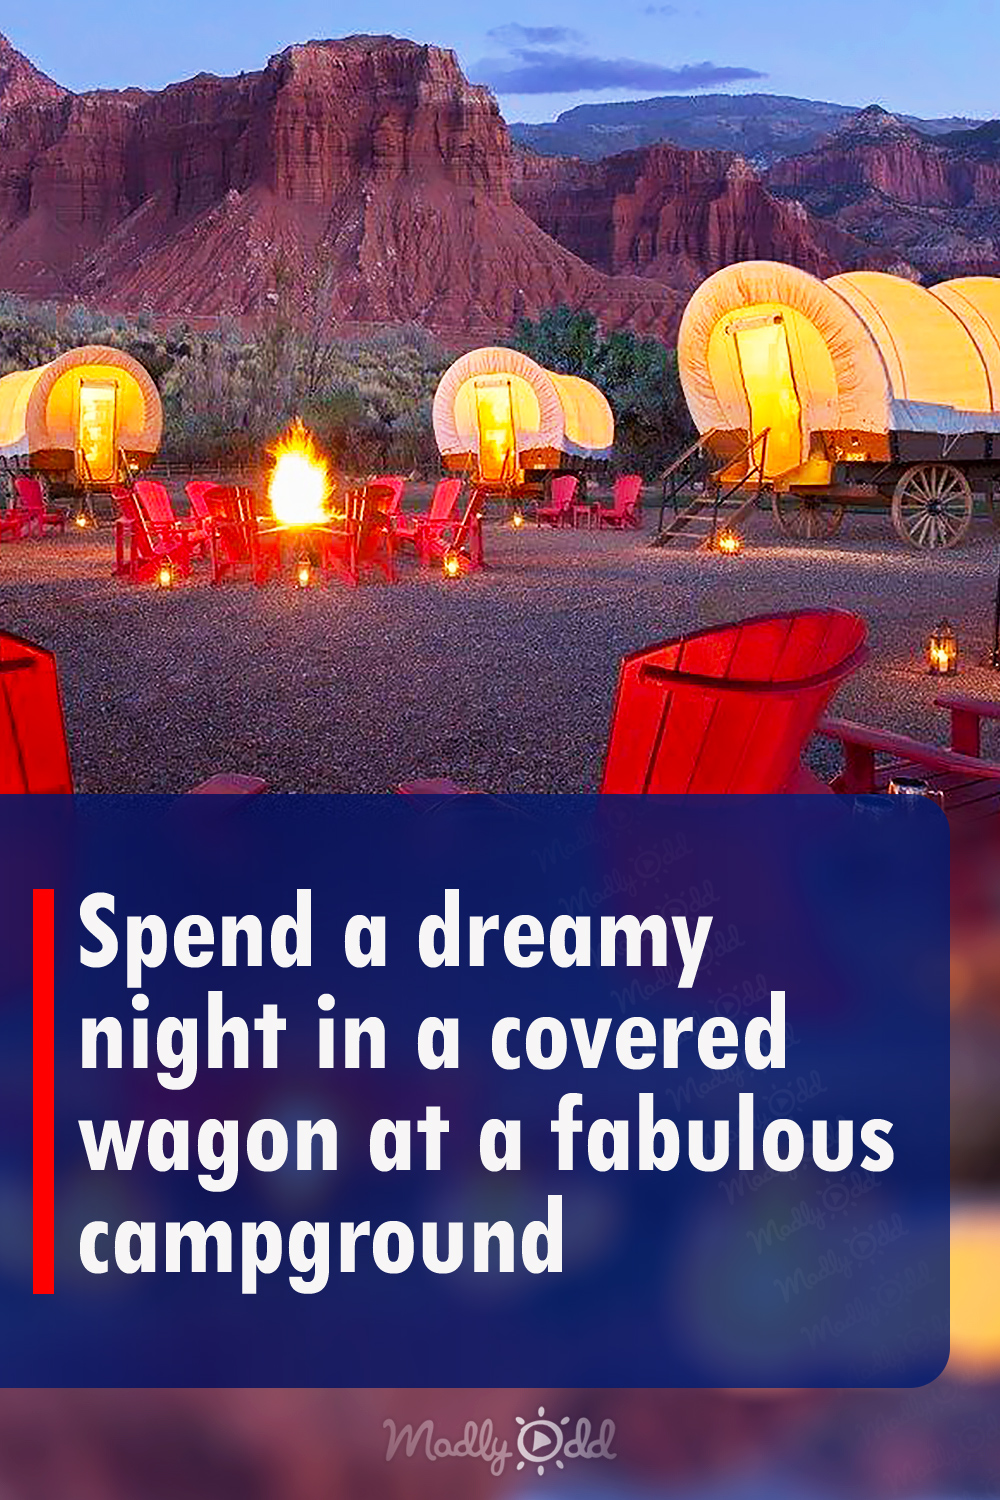 Spend a dreamy night in a covered wagon at a fabulous campground